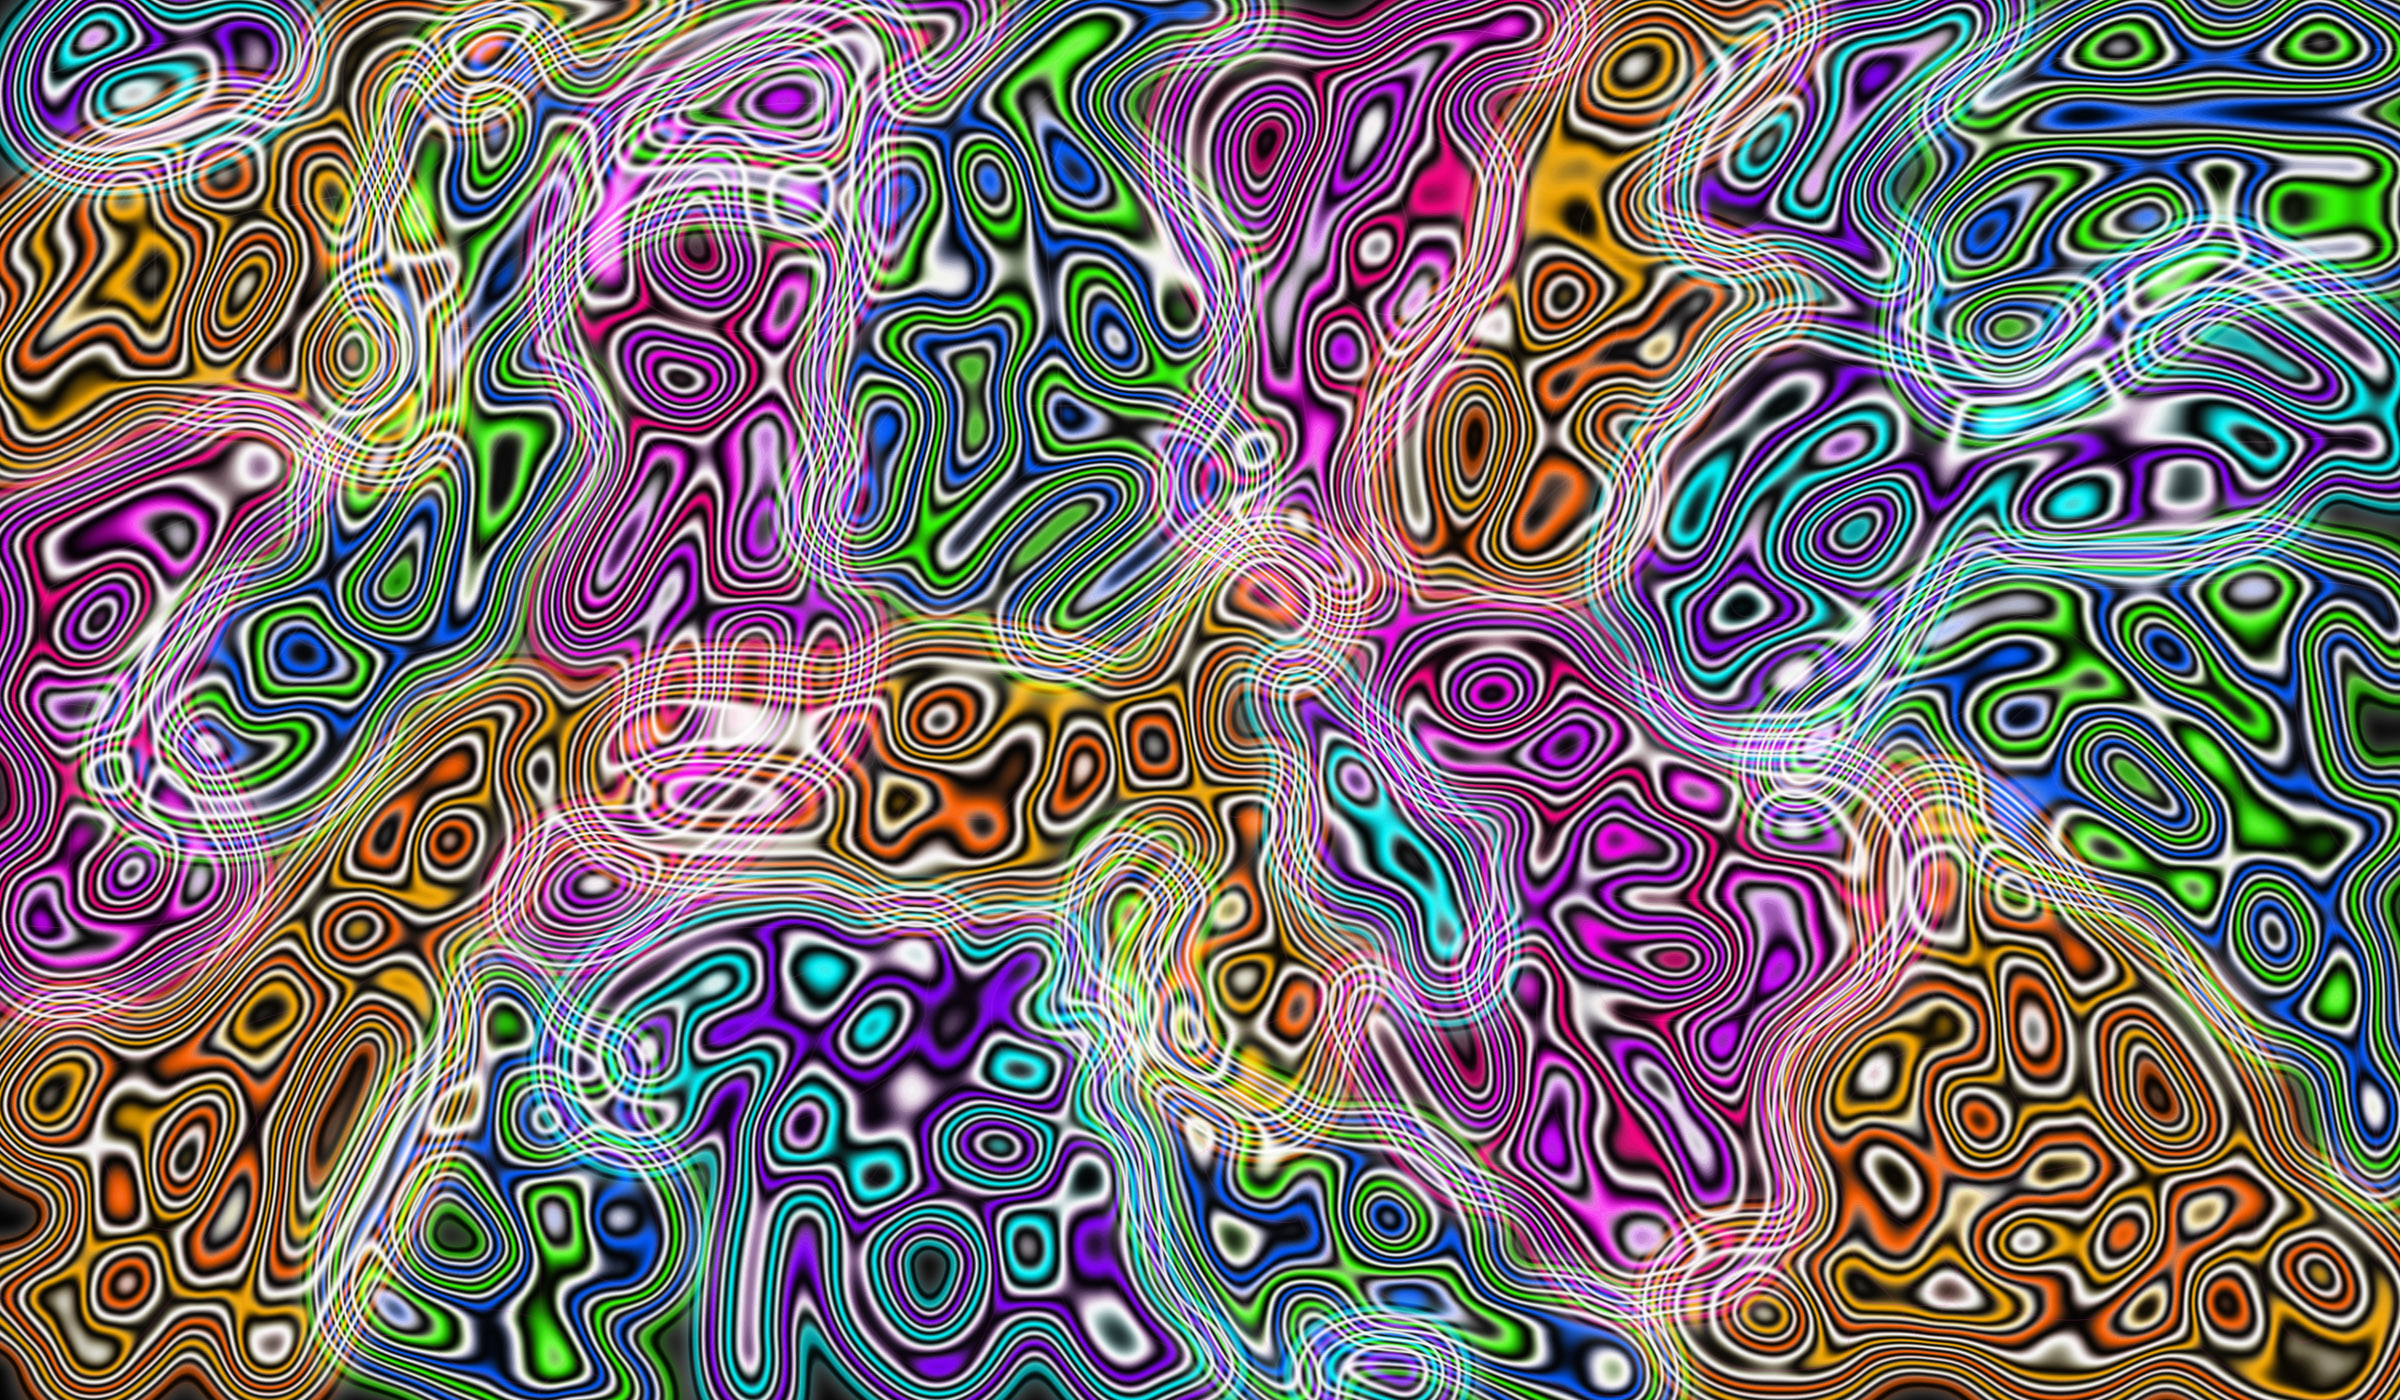 Drawn Wallpaper Trippy - Trippy High Quality Background , HD Wallpaper & Backgrounds